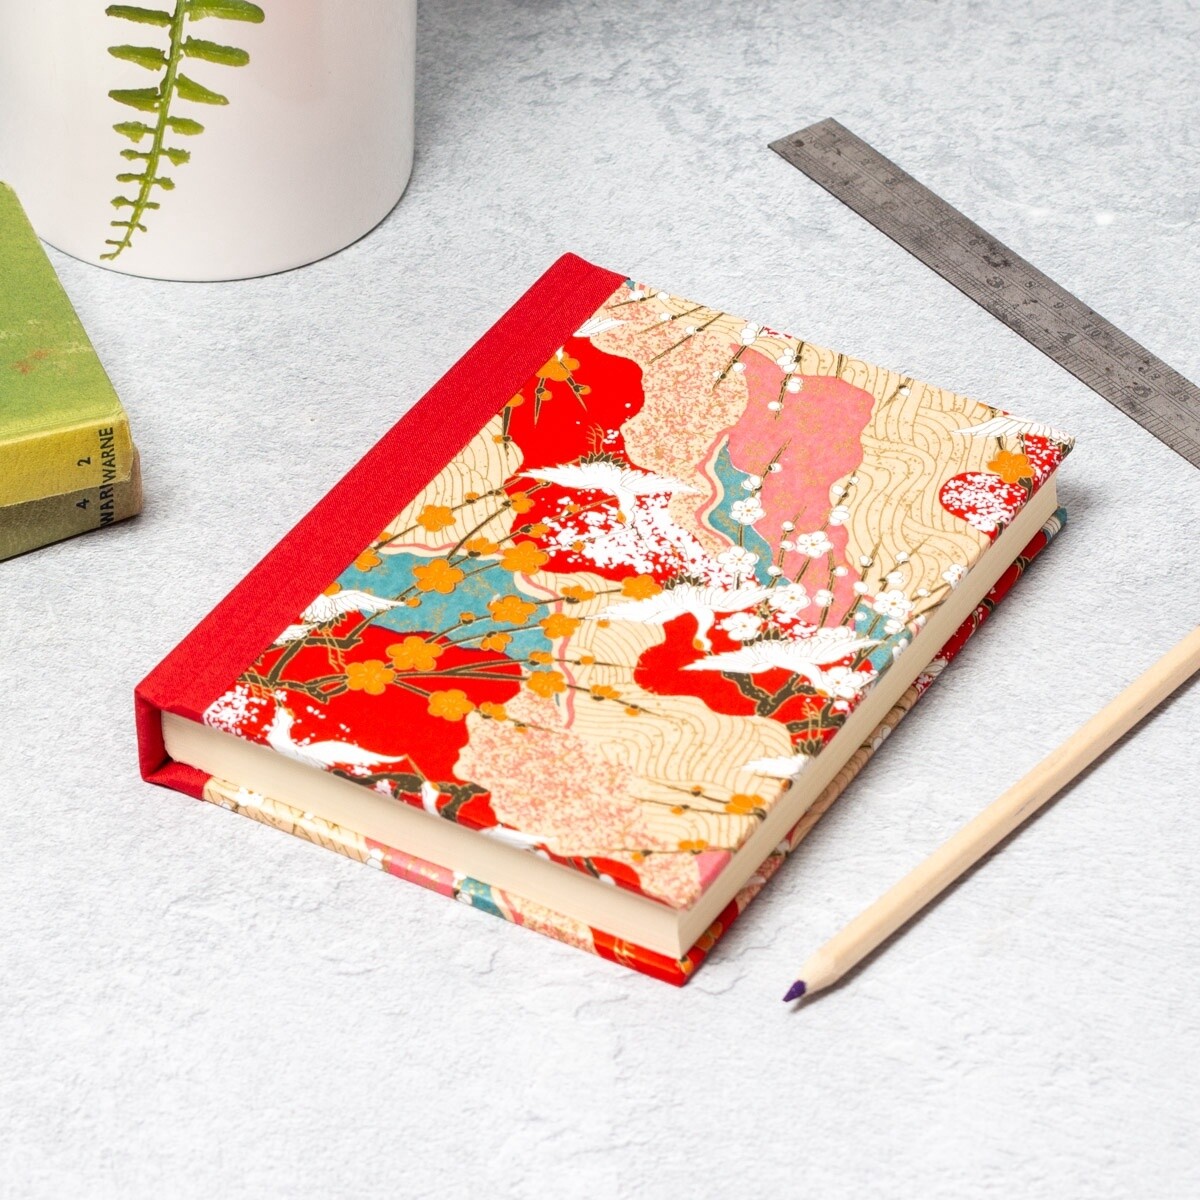 Classic Journal - Small - Cranes Collage/Red by Esmie